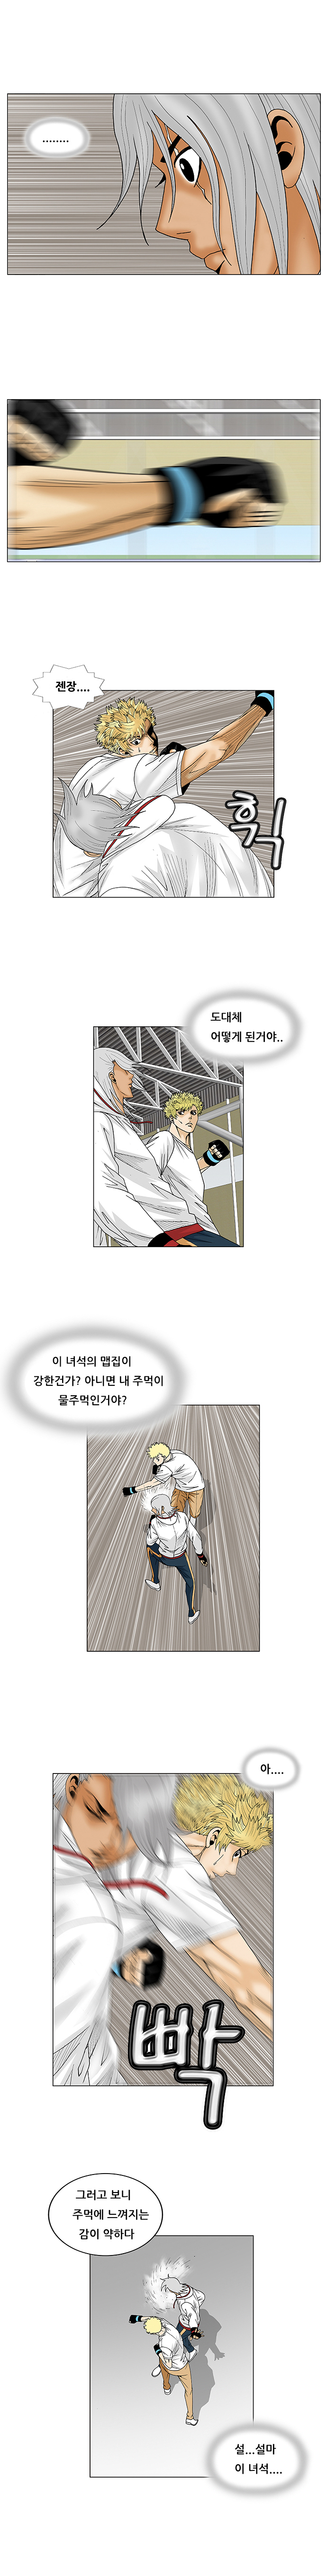 Ultimate Legend - Kang Hae Hyo - Chapter 73 - Page 13